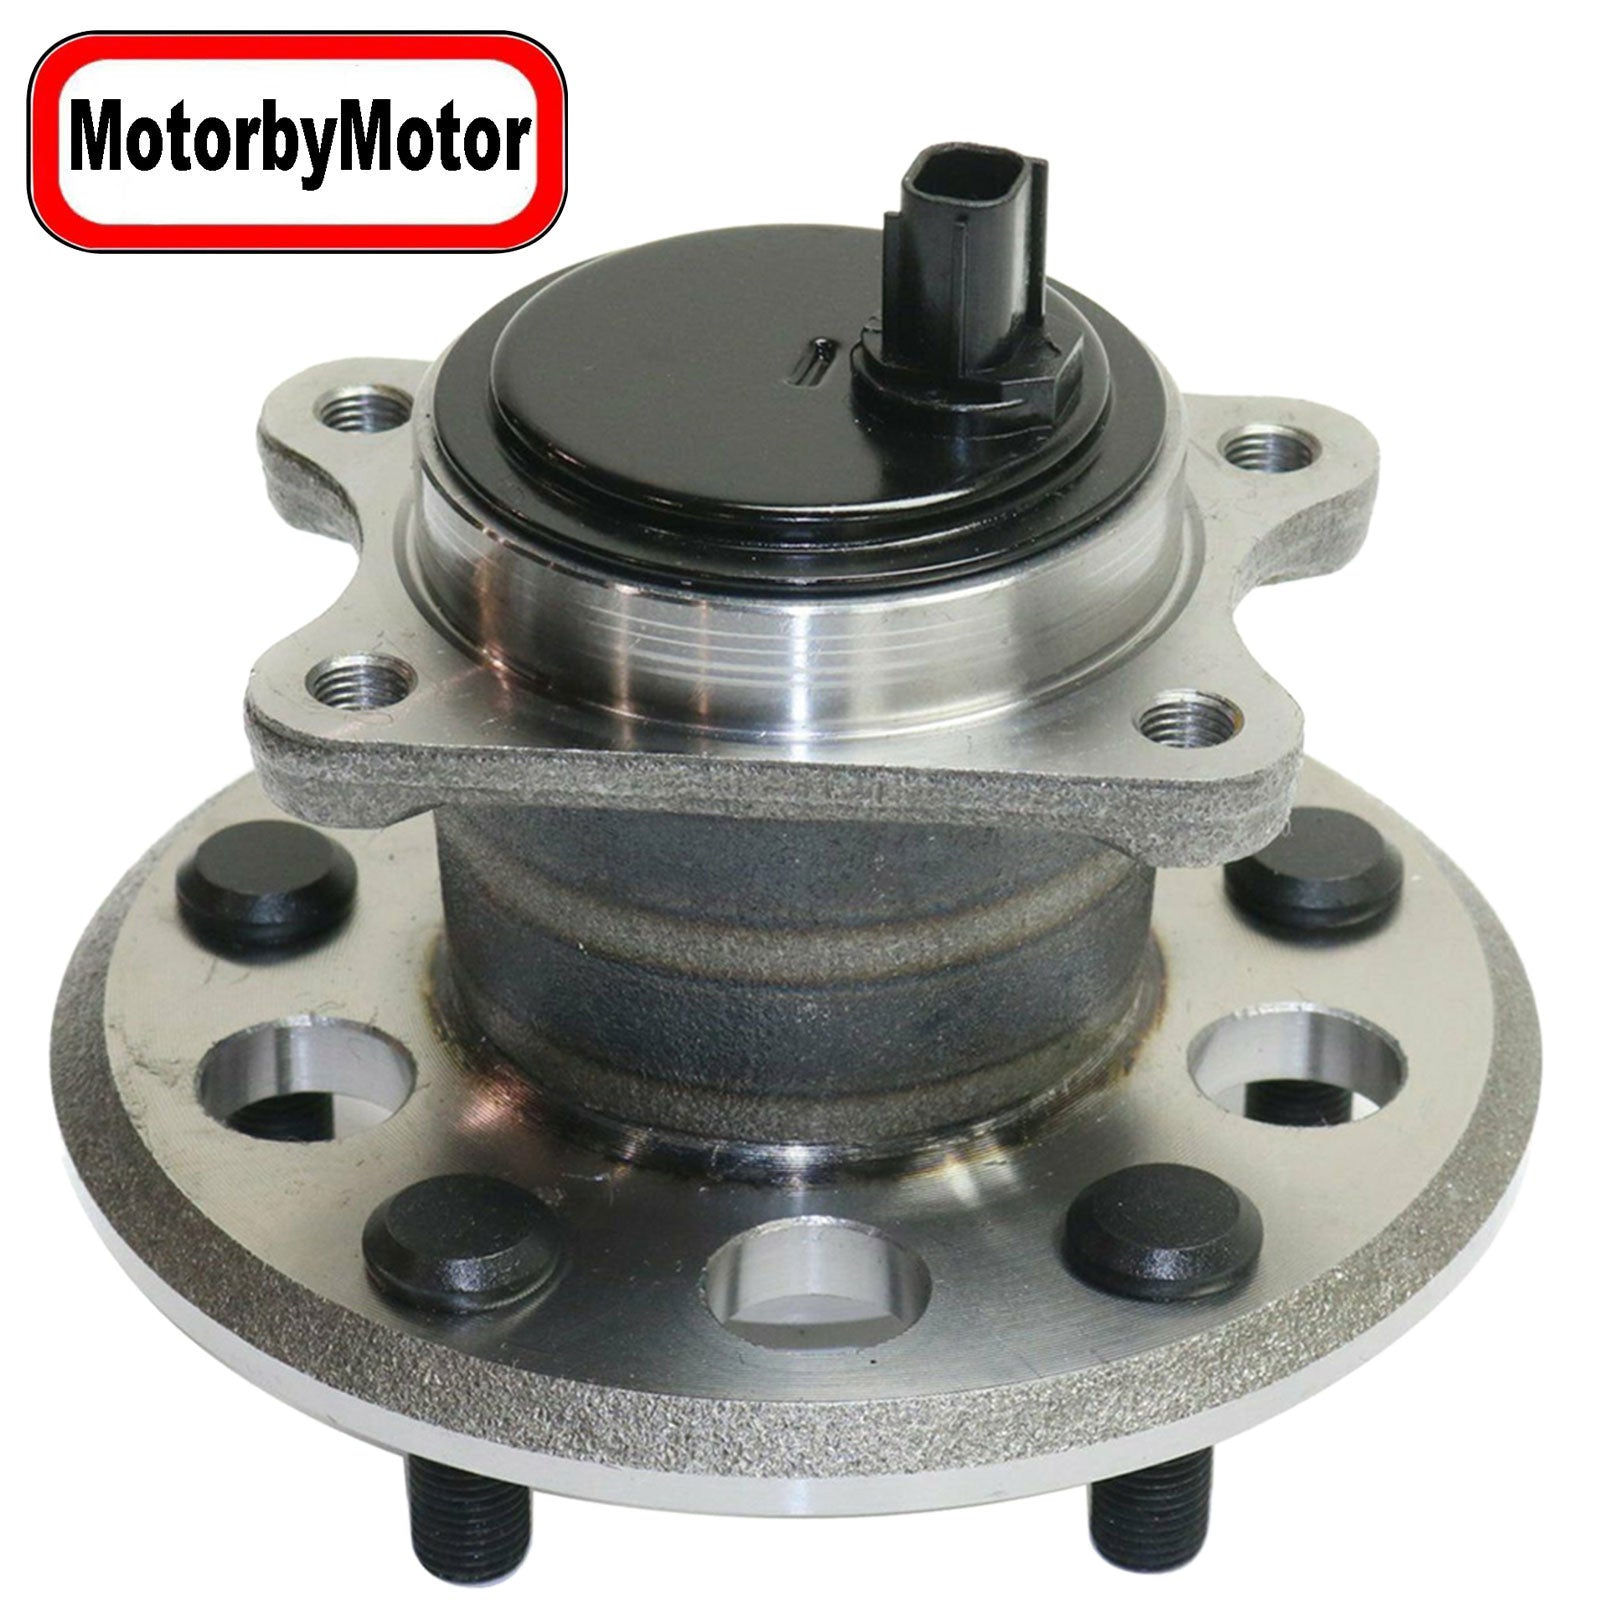 MotorbyMotor 512455 Rear Passenger Wheel Bearing and Hub Assembly with 5 Lugs Fits for 2013-2018 Toyota Avalon, 2012-2017 Toyota Camry Low-Runout OE Directly Replacement Hub Bearing (w/ABS, Right LH) MotorbyMotor